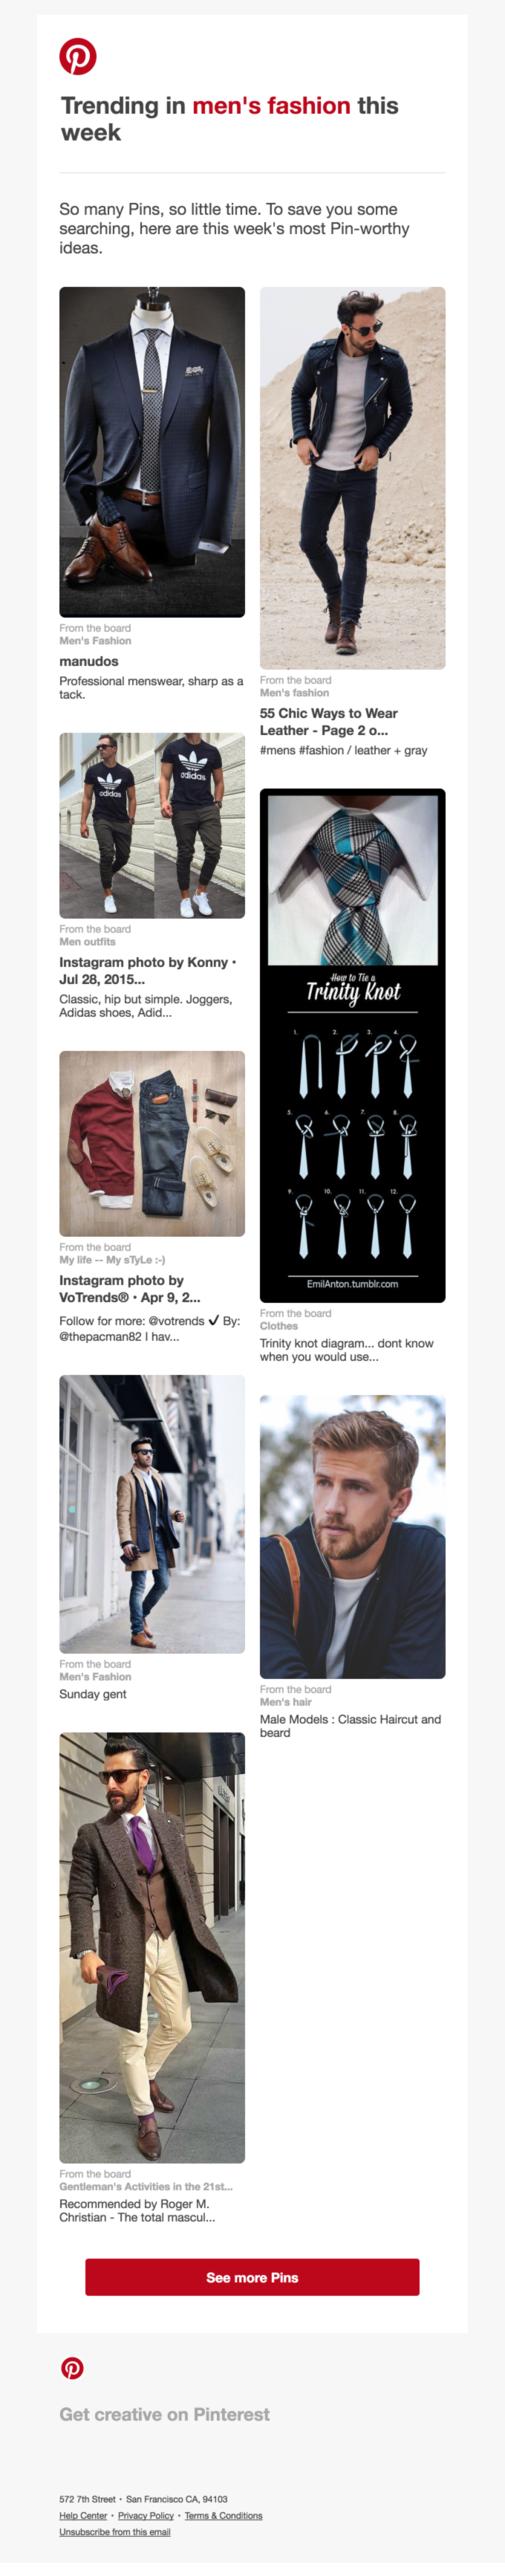 Top 8 trending Pins in men’s fashion